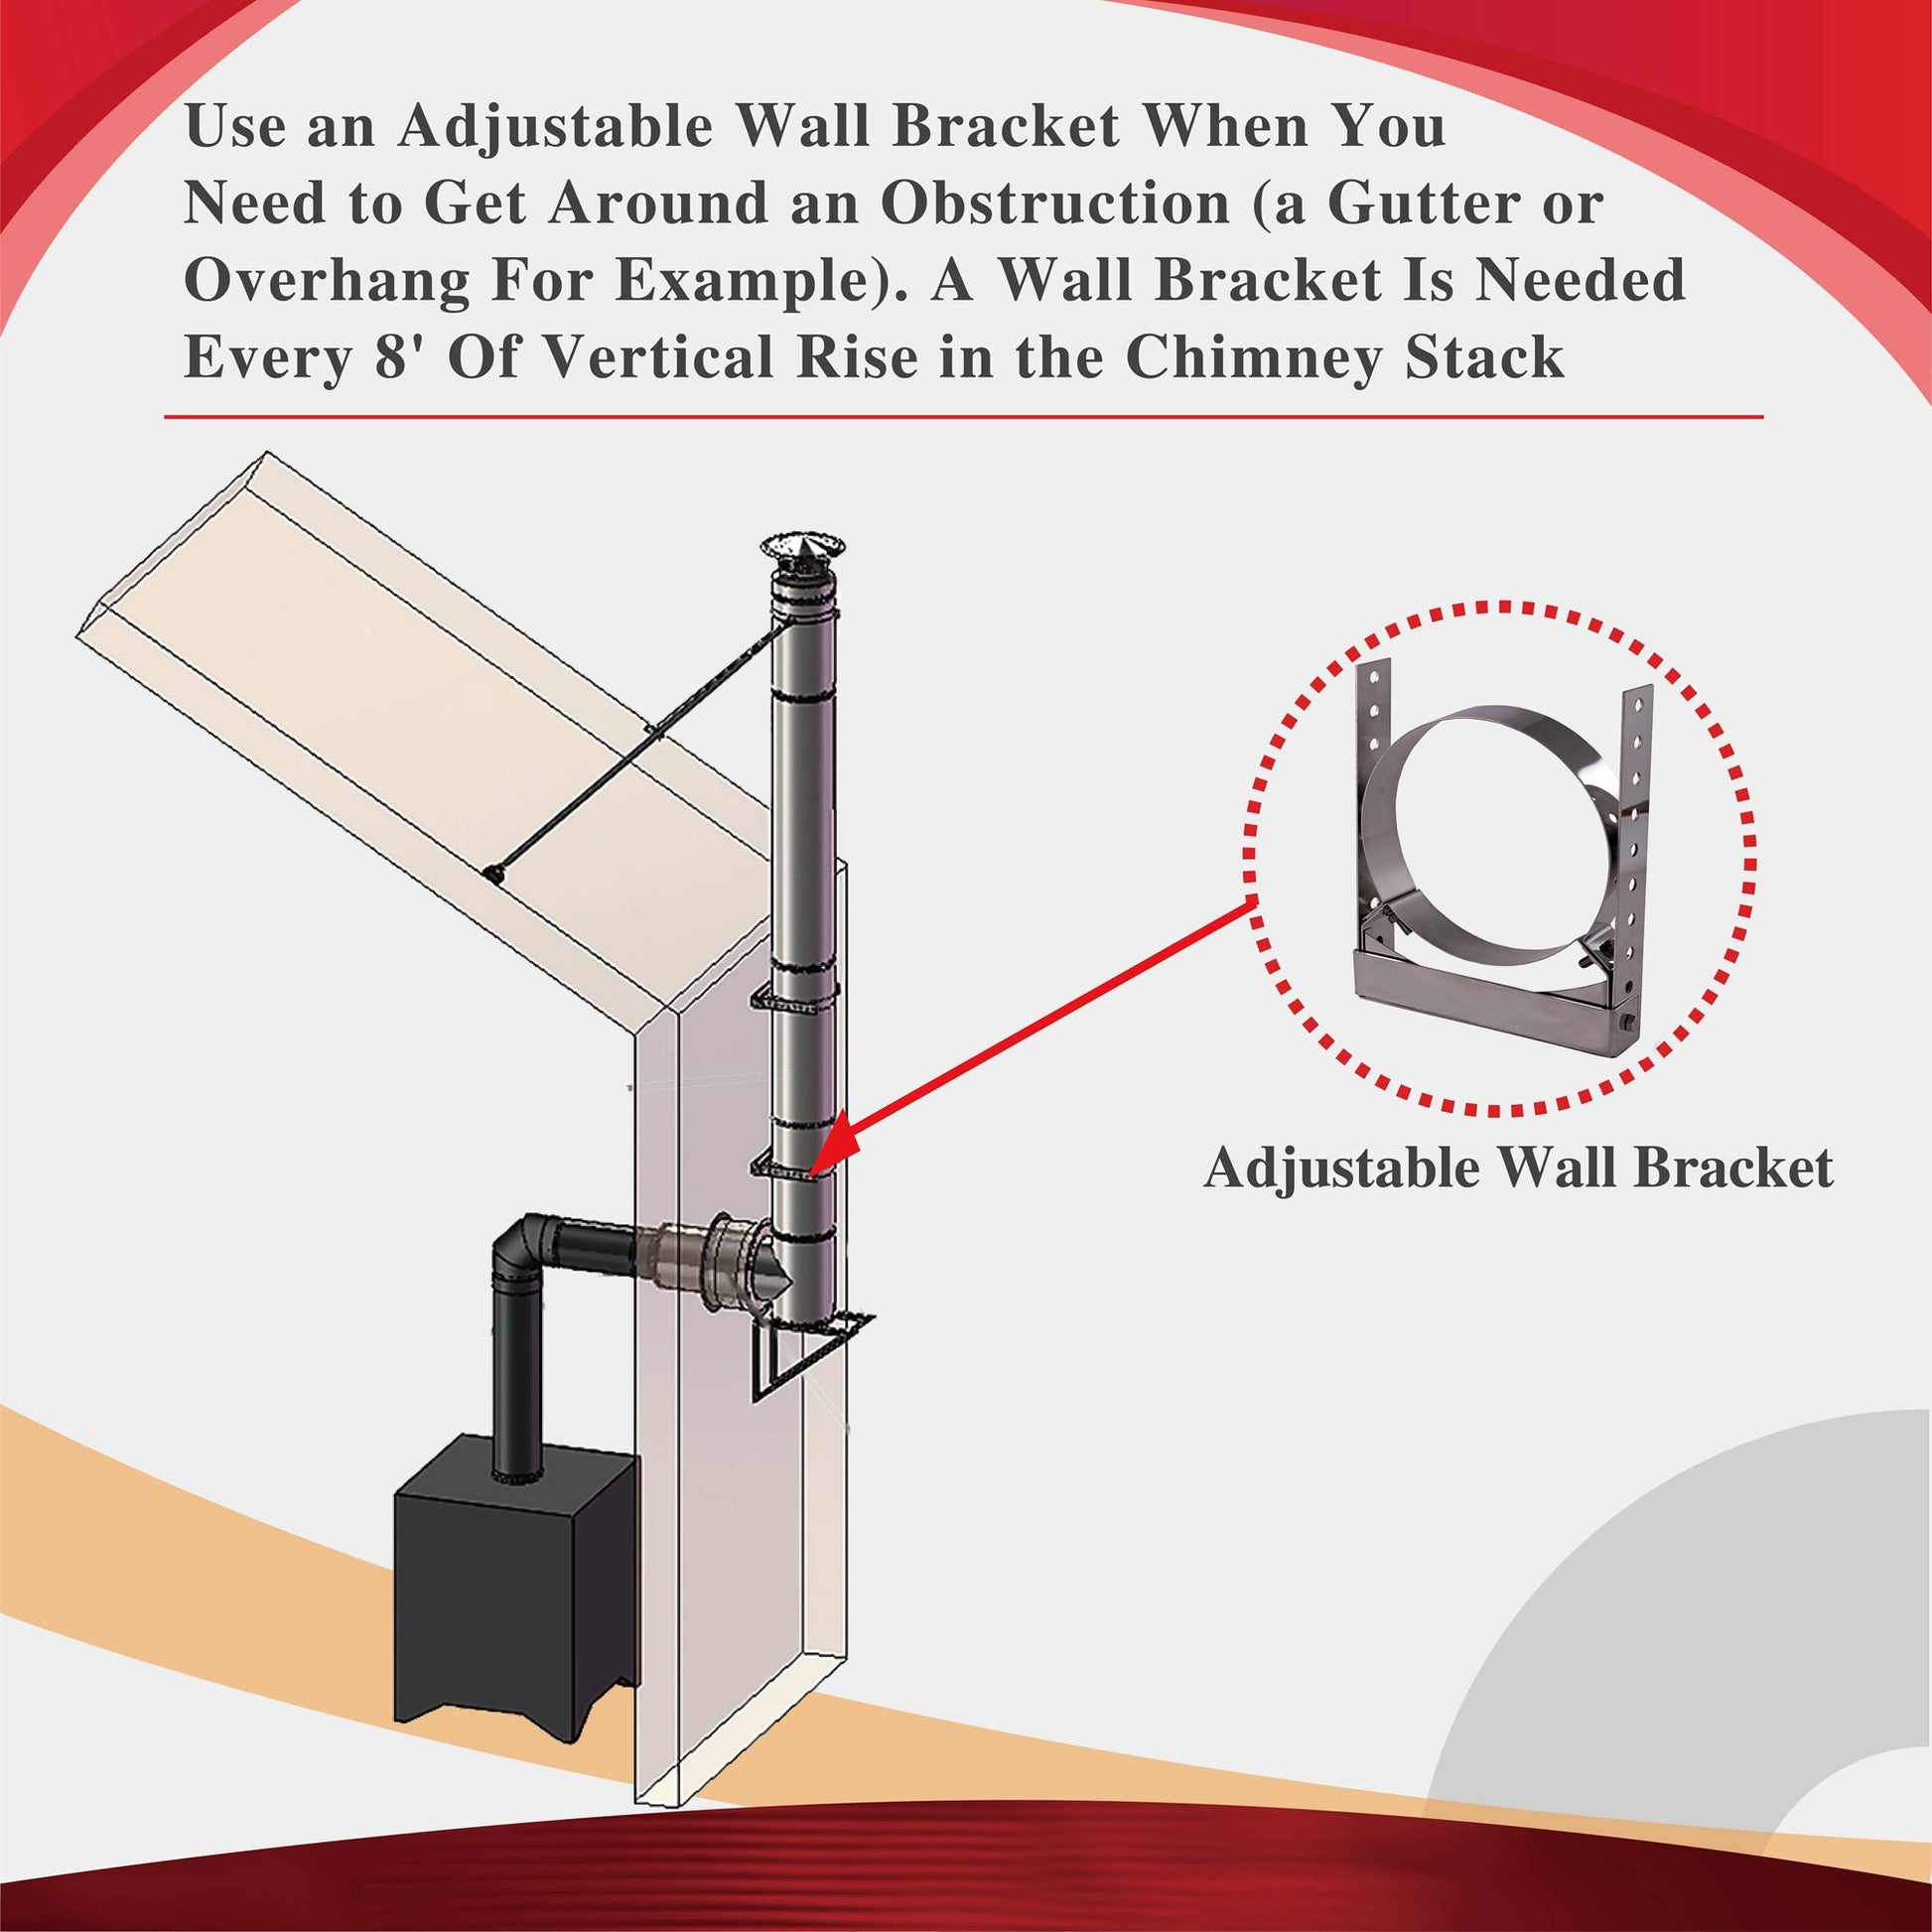 Adjustable Wall Bracket for 8" Double Wall Chimney Pipe